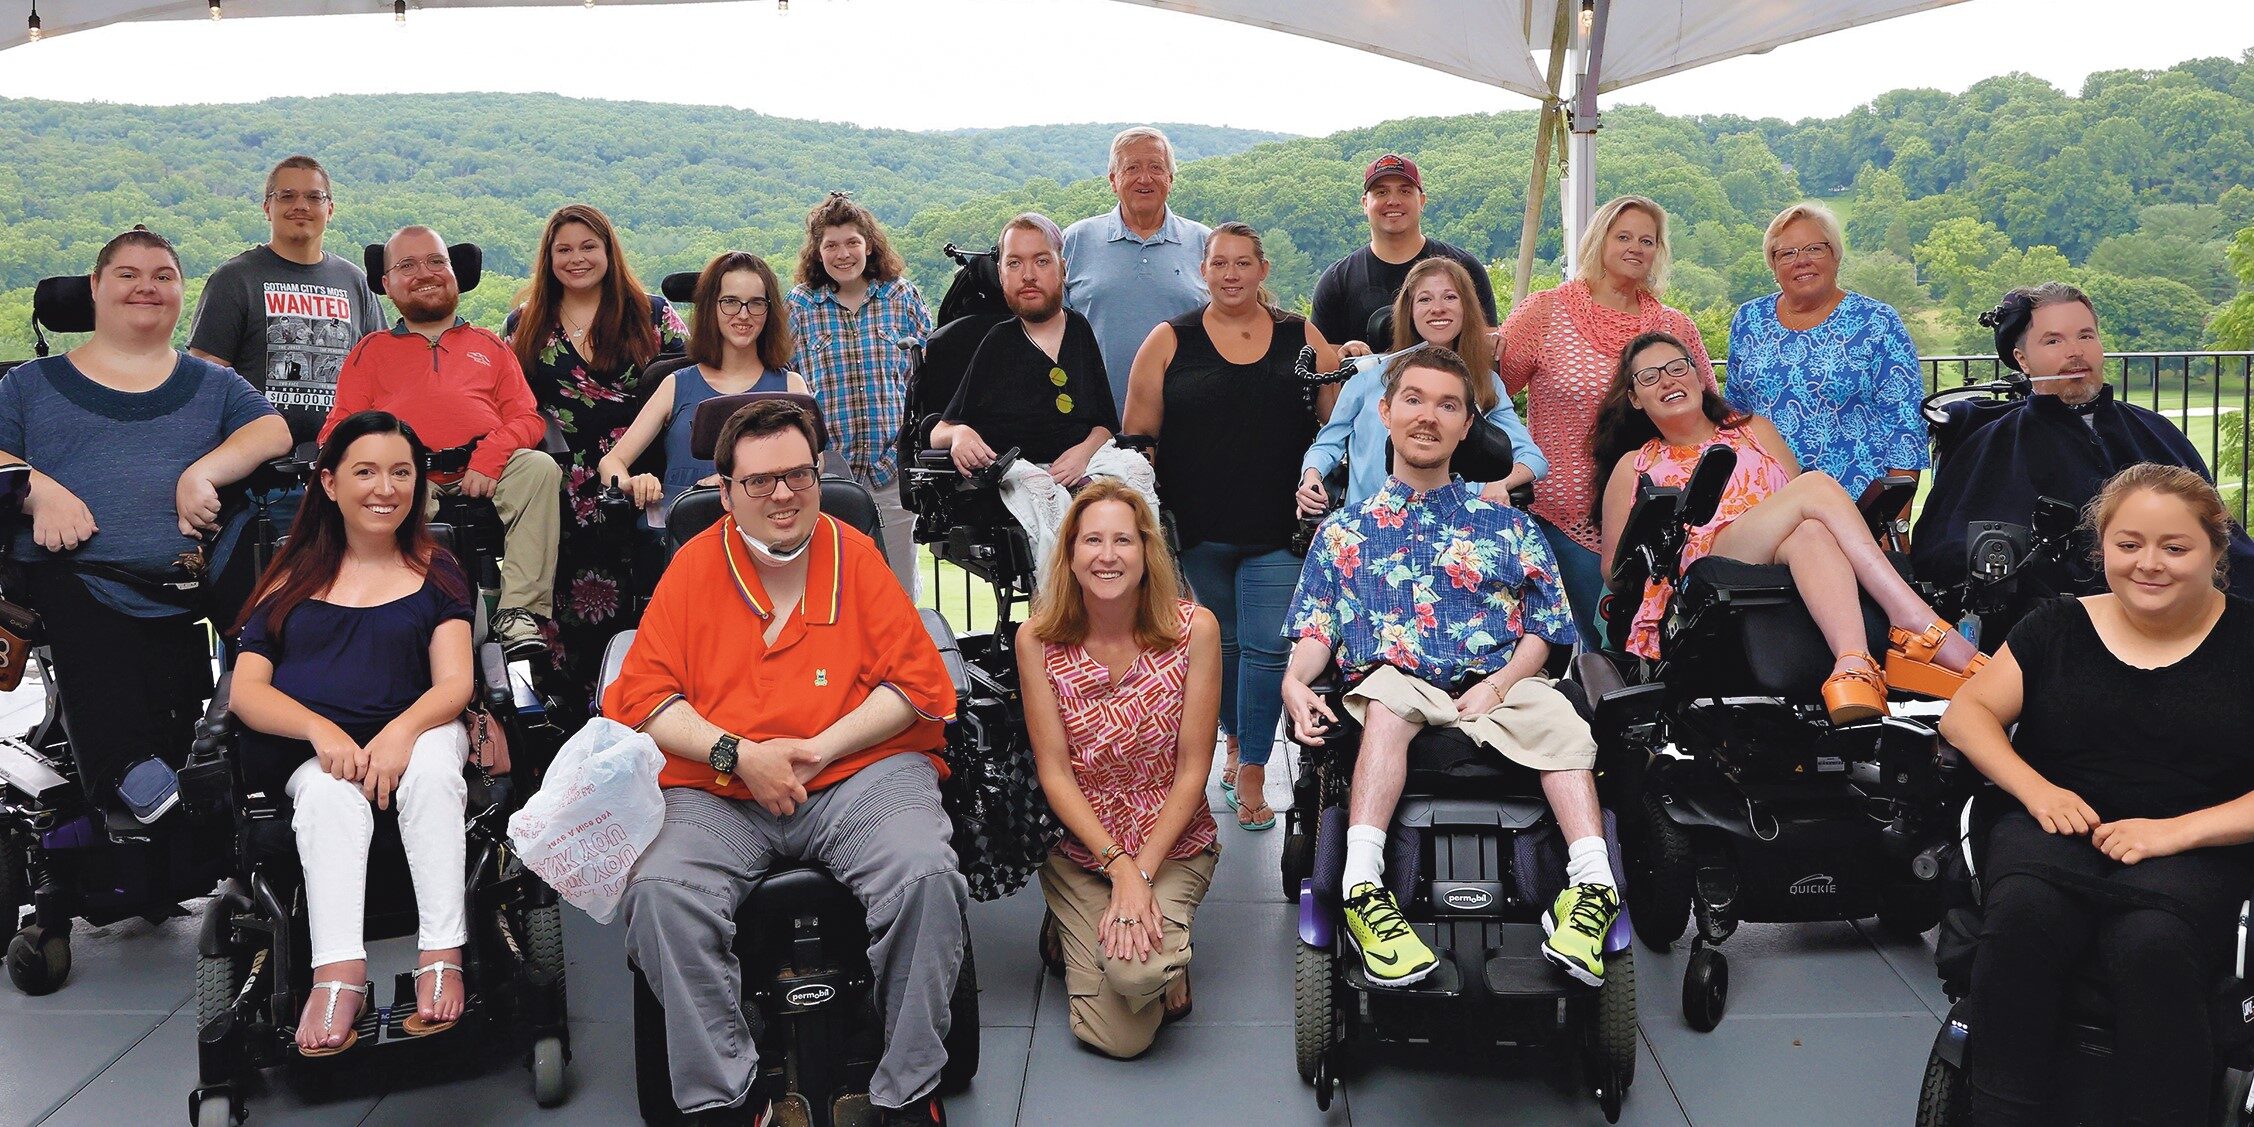 Twenty former MDA Summer Campers and counselors gather on a patio with a backdrop of green forested hills.